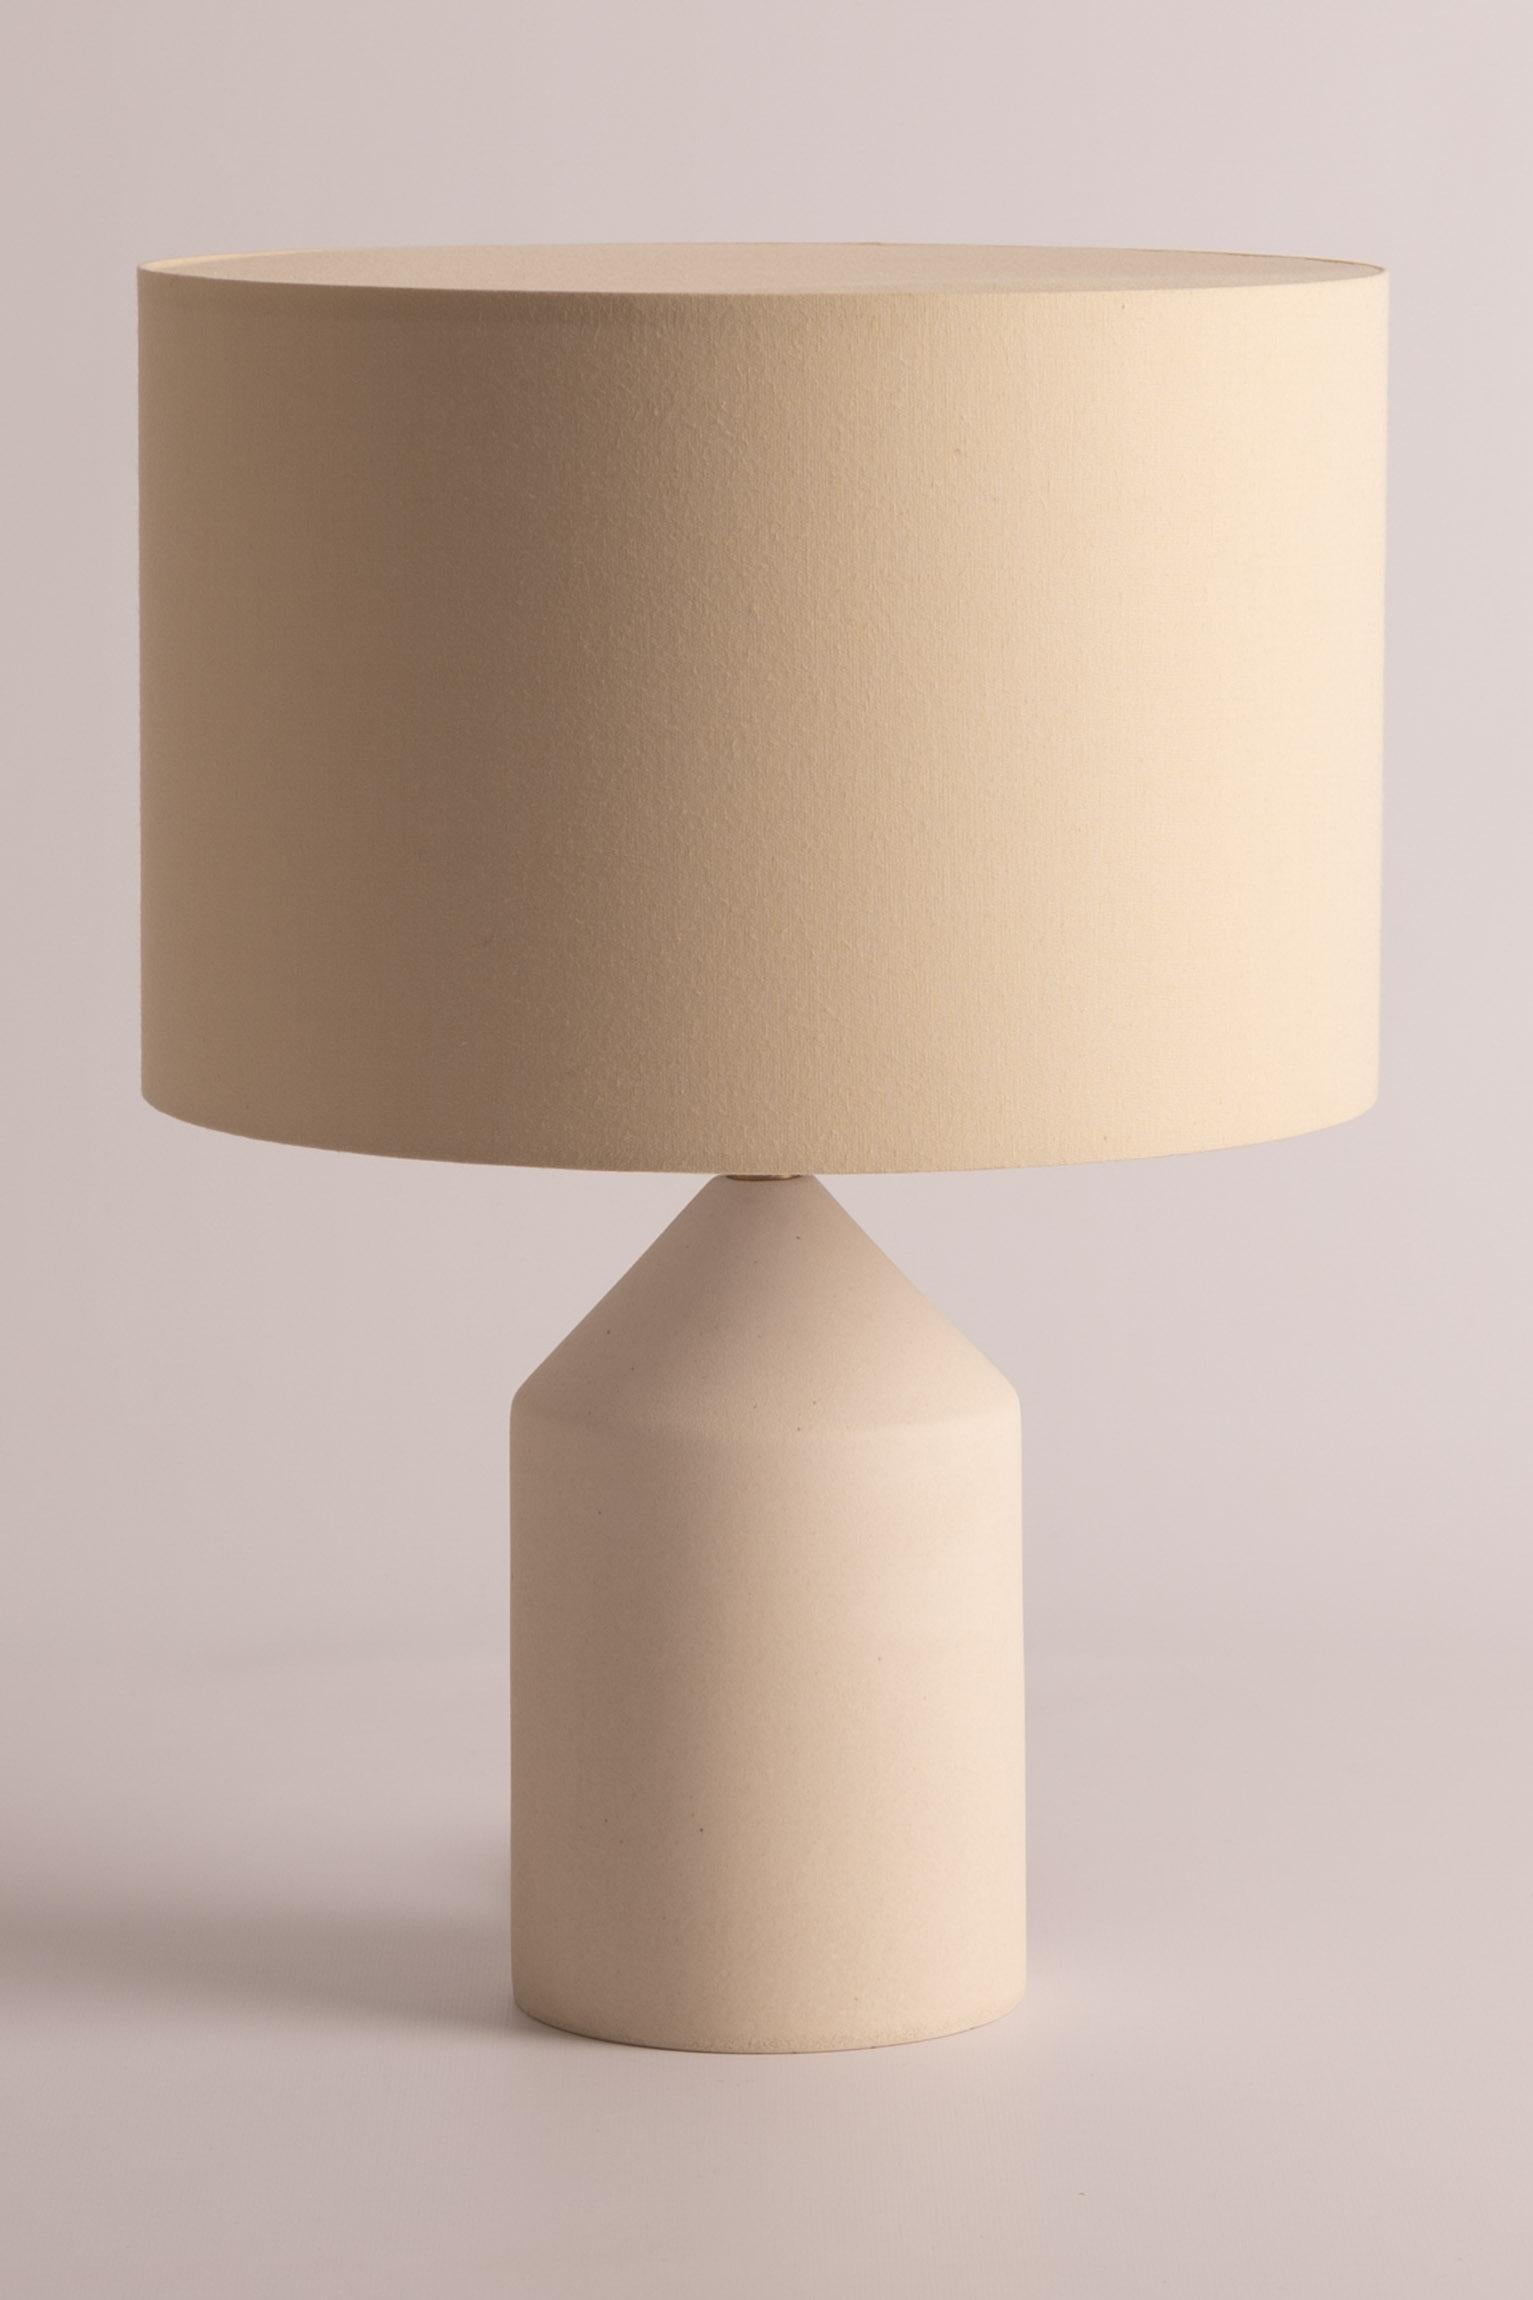 Ecru Ceramic Josef Table Lamp by Simone & Marcel
Dimensions: Ø 30 x H 41.5 cm.
Materials: Brass, cotton and ceramic.

Also available in different marble, wood and alabaster options and finishes. Custom options available on request. Please contact